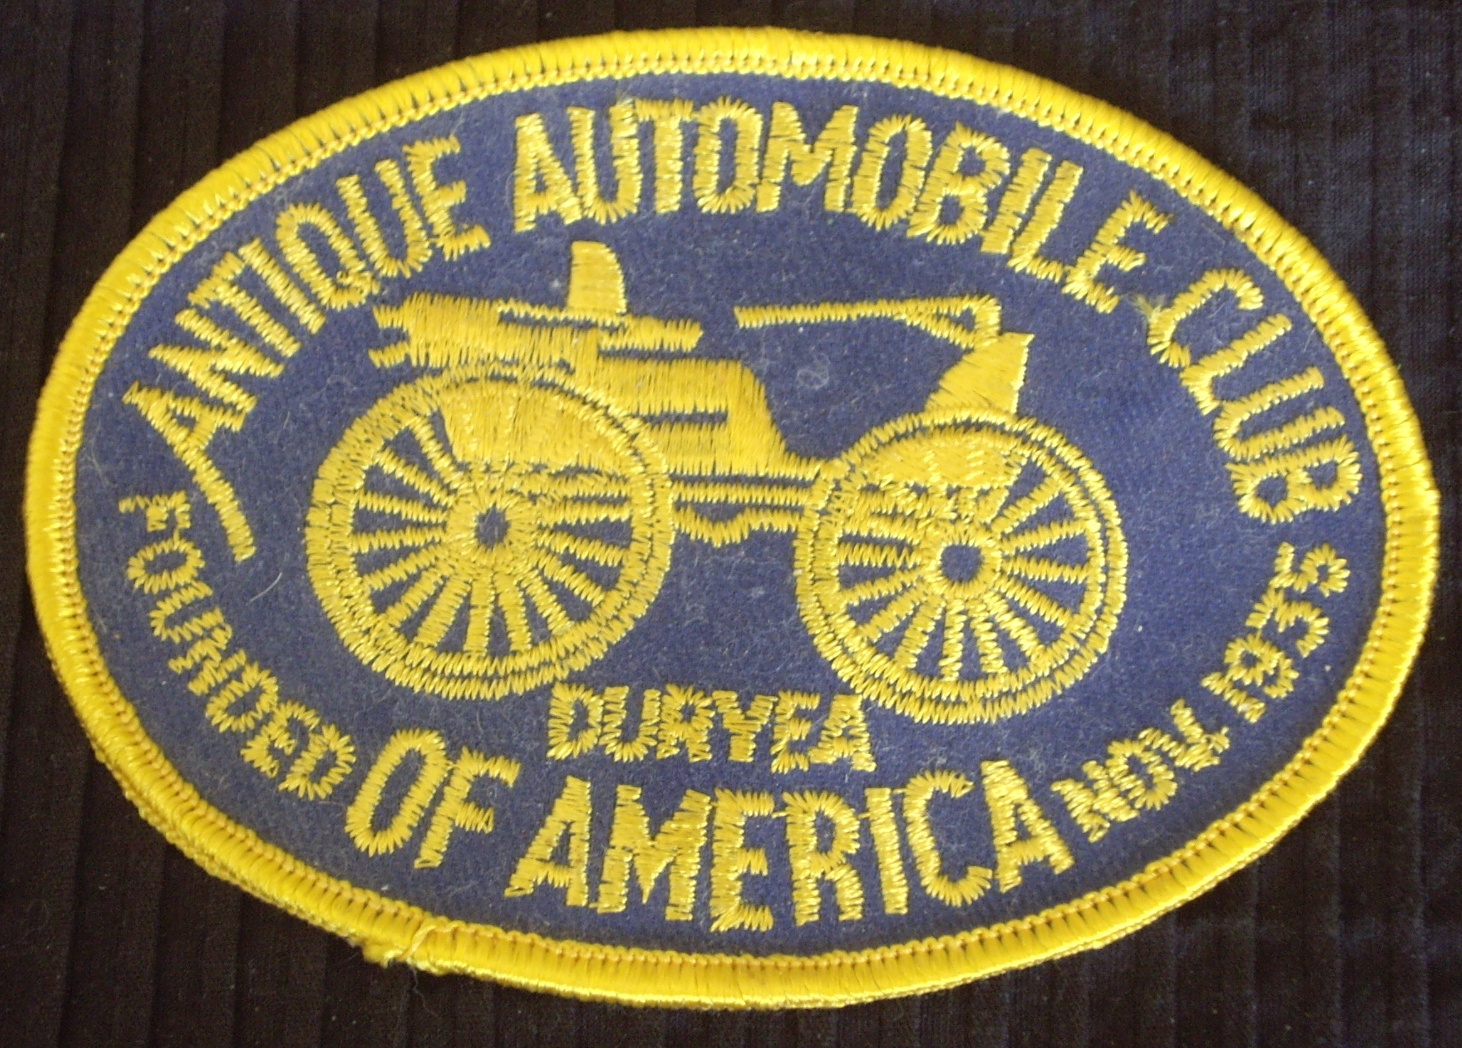 ANTIQUE AND CLASSIC CAR CLUBS LOCATED BY STATE